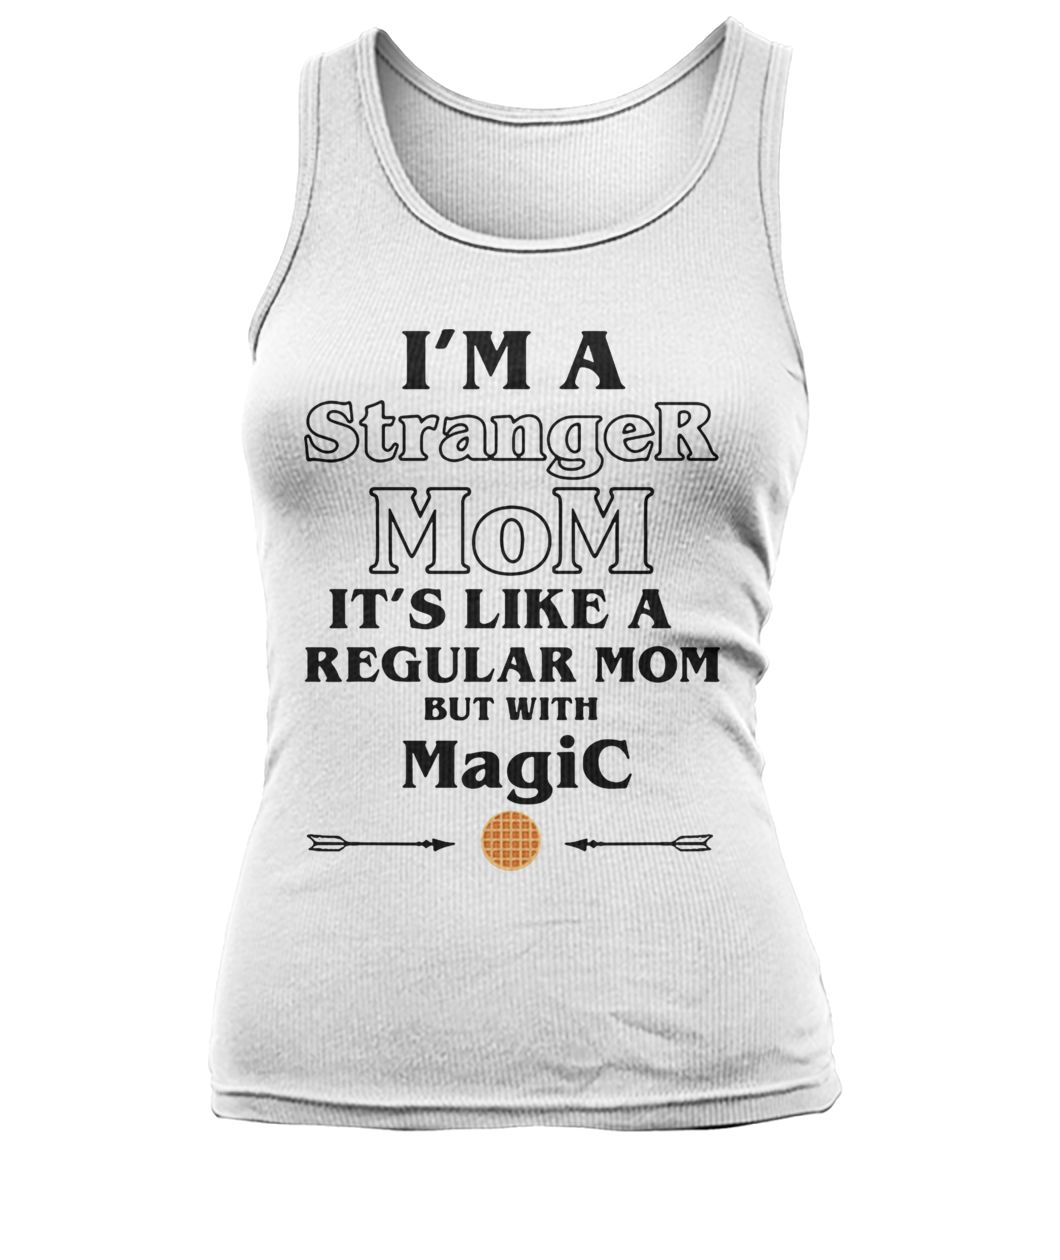 I'm a stranger mom it's like a regular mom but with magic women's tank top